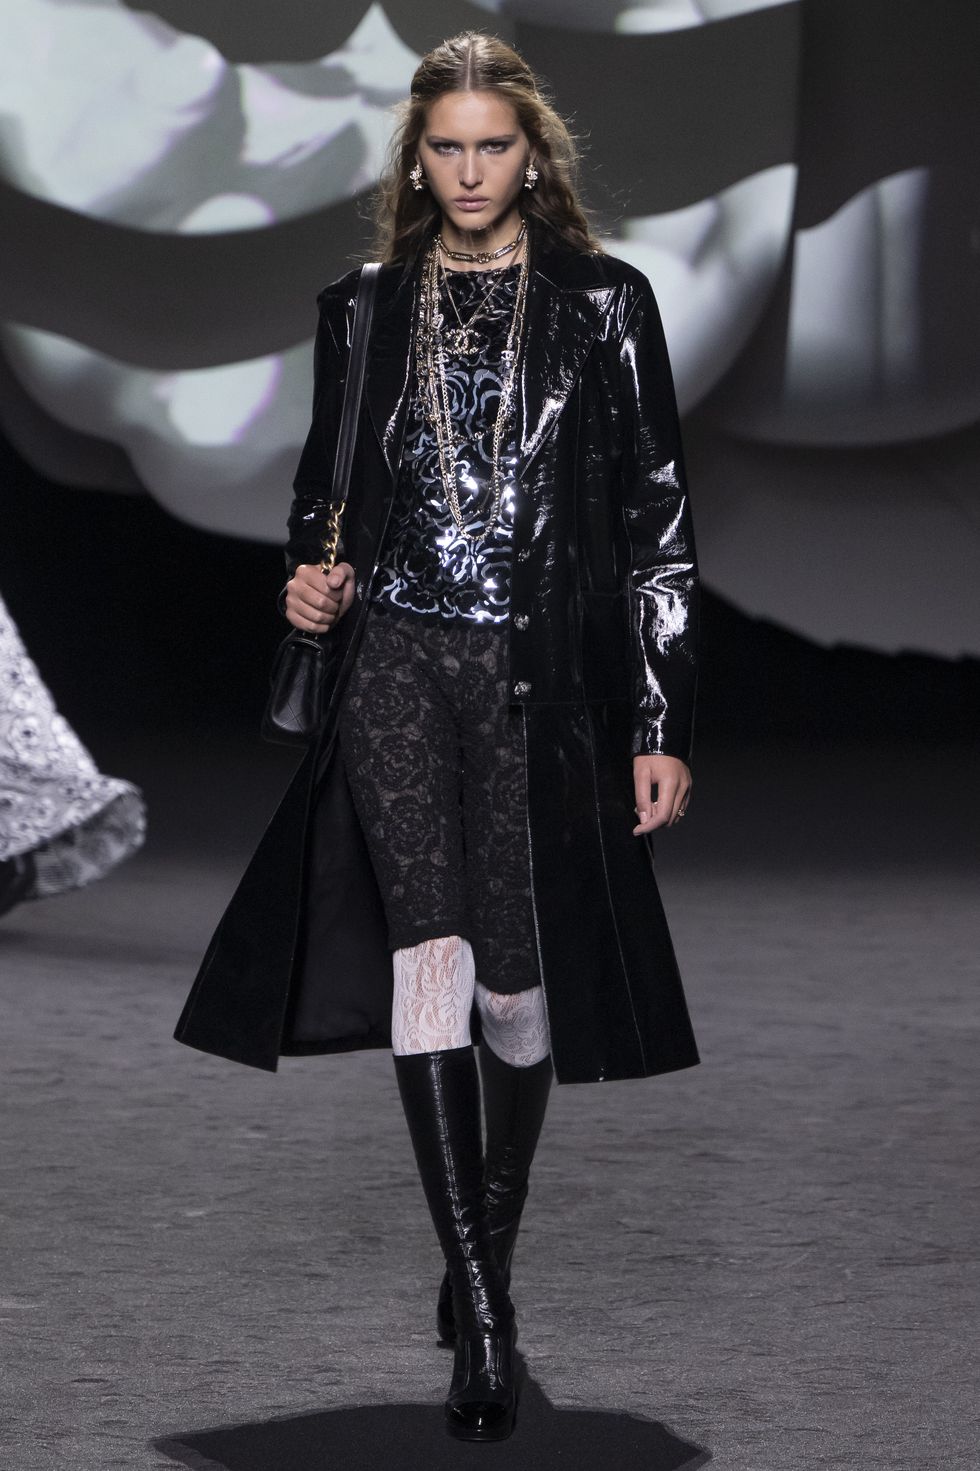 paris, france march 07 a model walks the runway during the chanel ready to wear fallwinter 2023 2024 fashion show as part of the paris fashion week on march 7, 2023 in paris, france photo by victor virgilegamma rapho via getty images